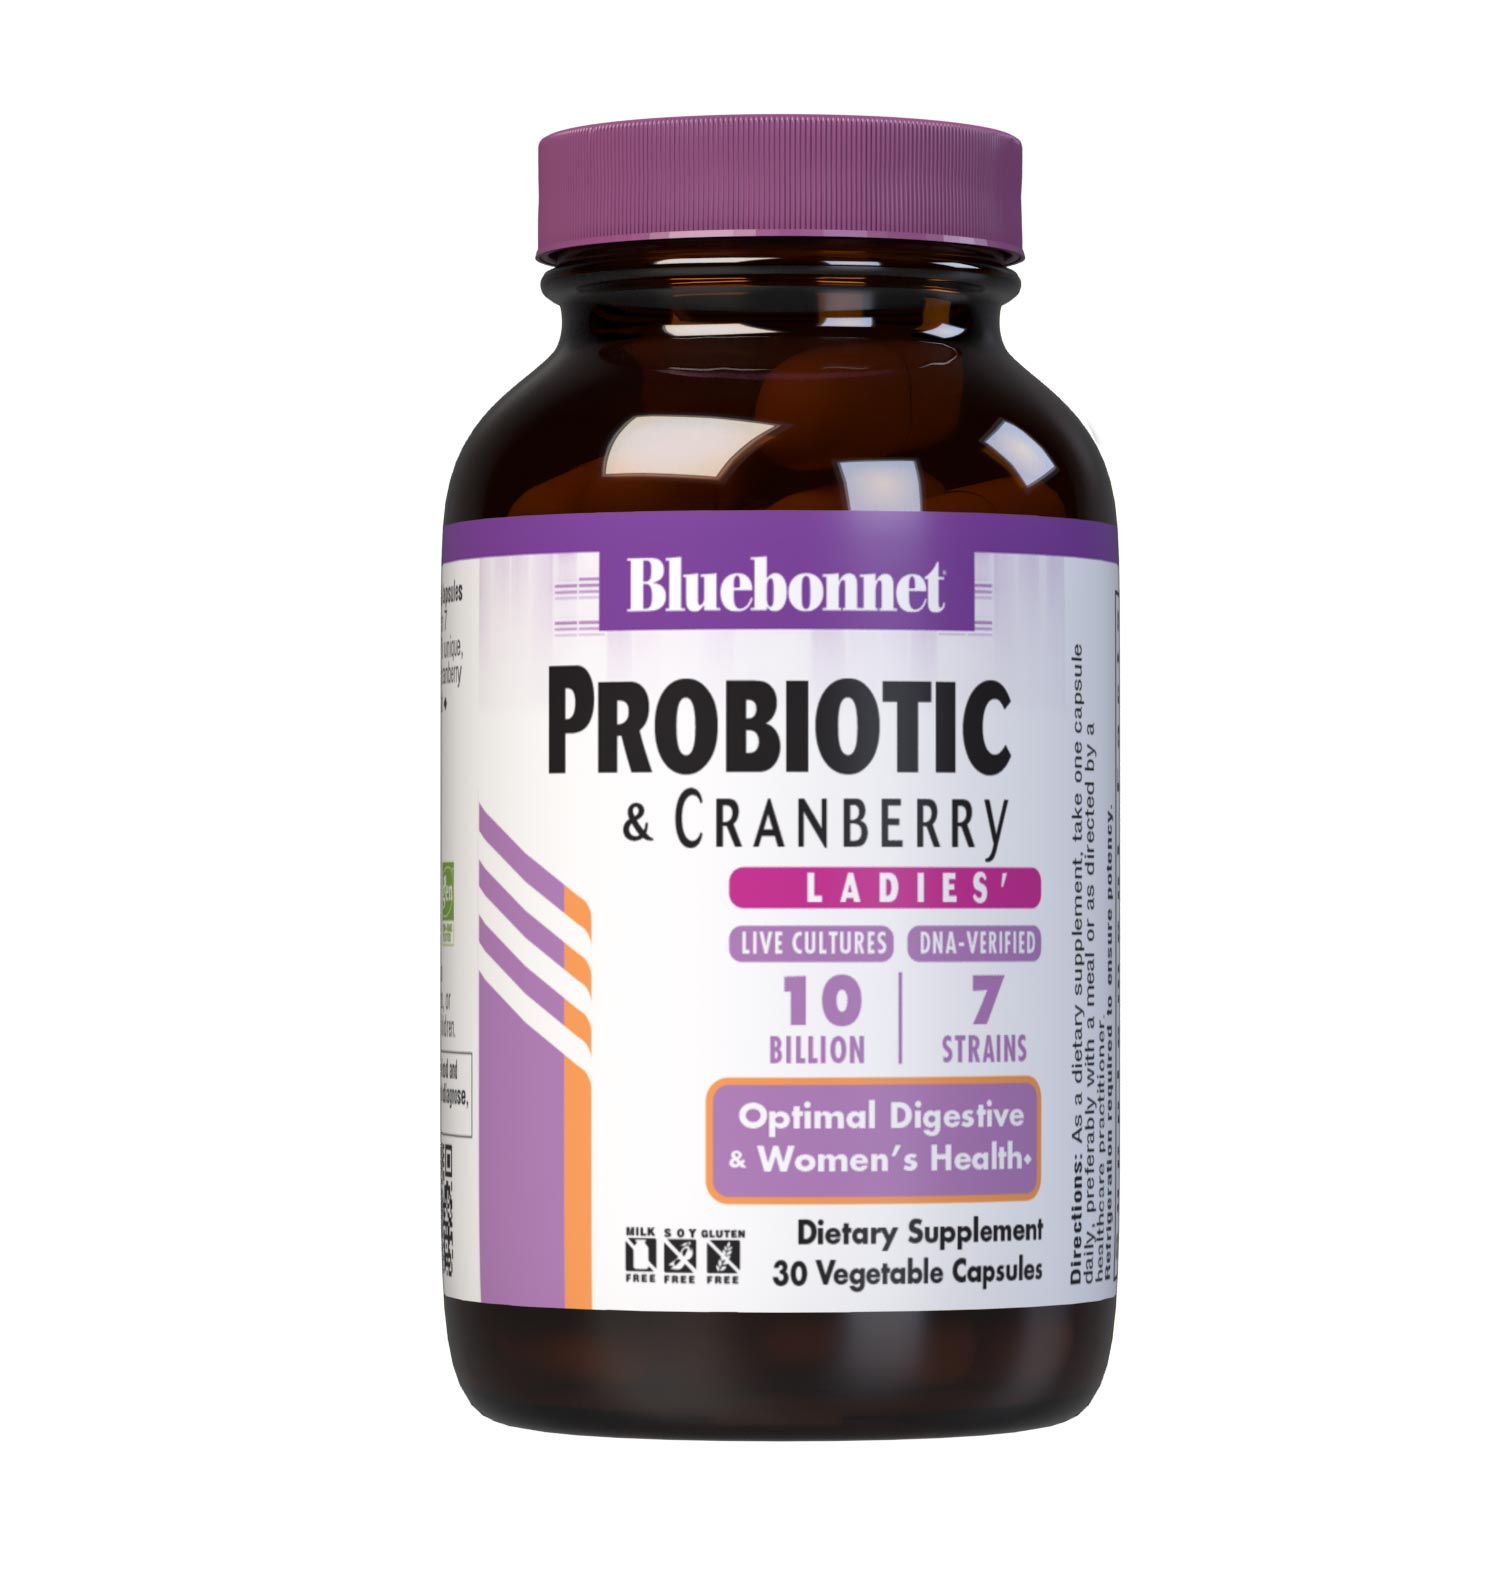 Bluebonnet’s Ladies' Probiotic & Cranberry 30 Vegetable Capsules are formulated with 10 billion viable cultures from 7 DNA-verified, scientifically supported strains. This unique, science-based probiotic formula is infused with cranberry fruit extract to further nurture urinary tract health. #size_30 count